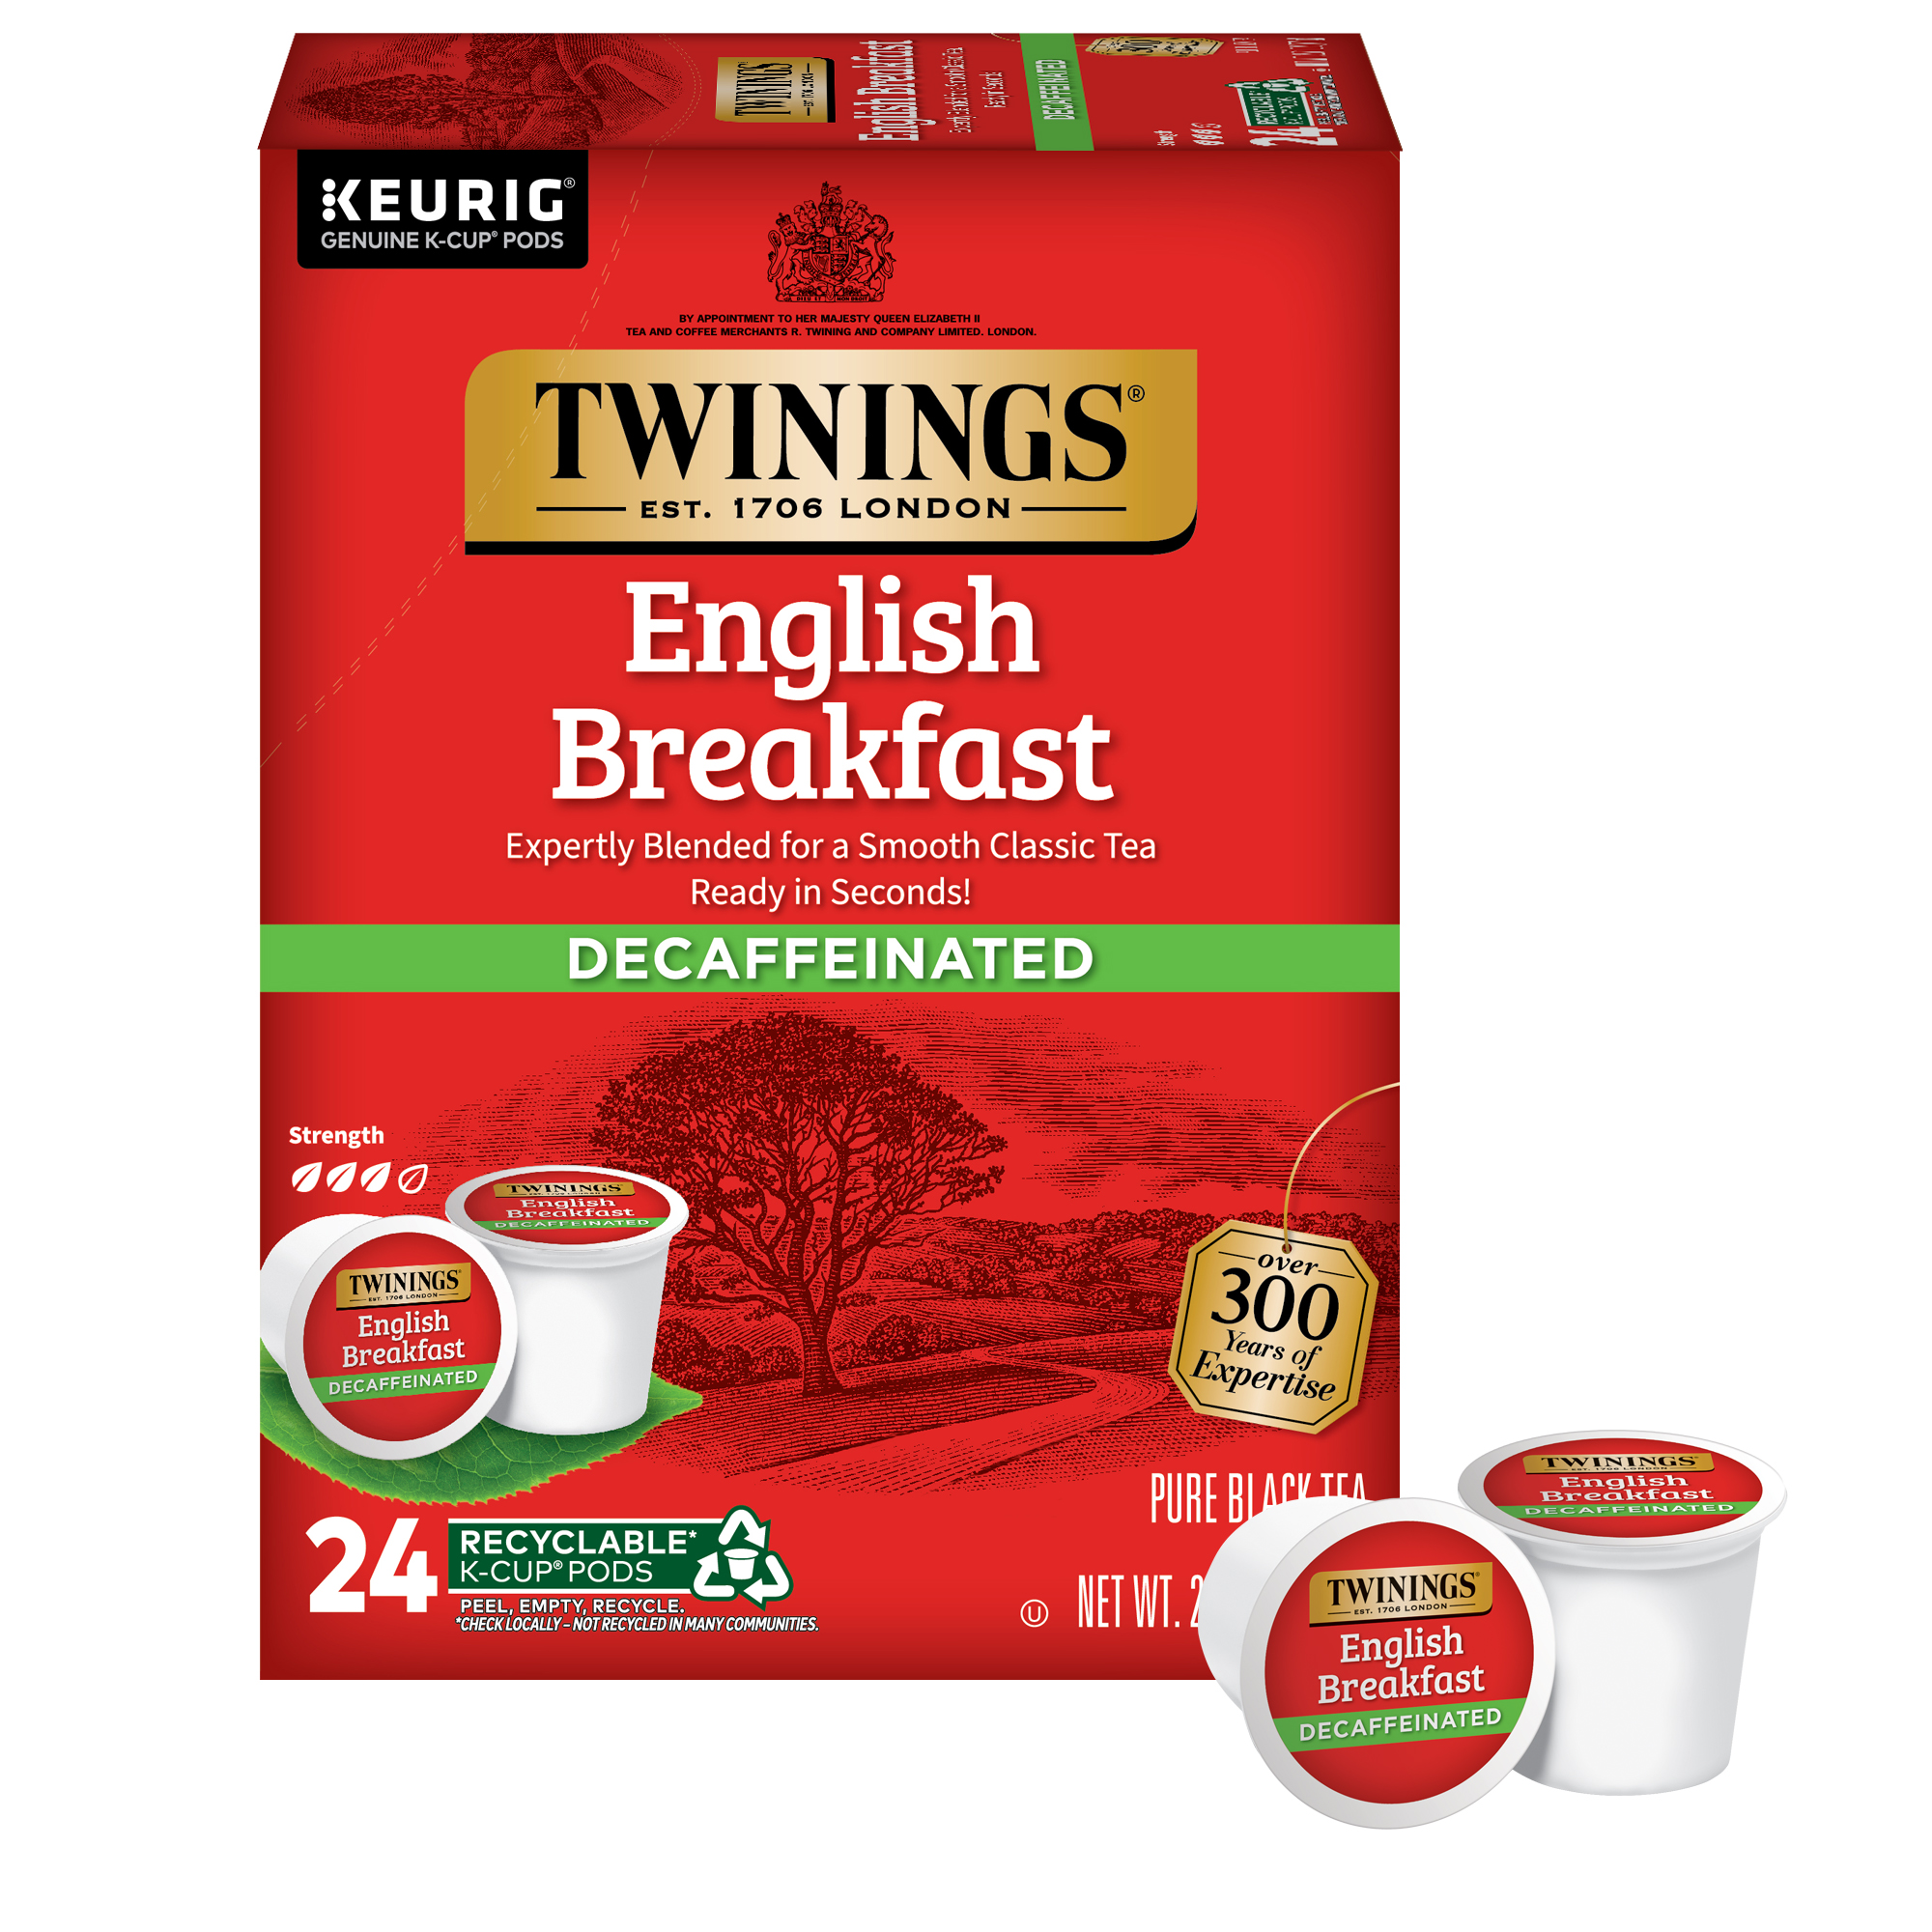 Twinings English Breakfast Decaffeinated K-Cup® Pods for Keurig, Pure Black Tea, 24 Count - image 1 of 7